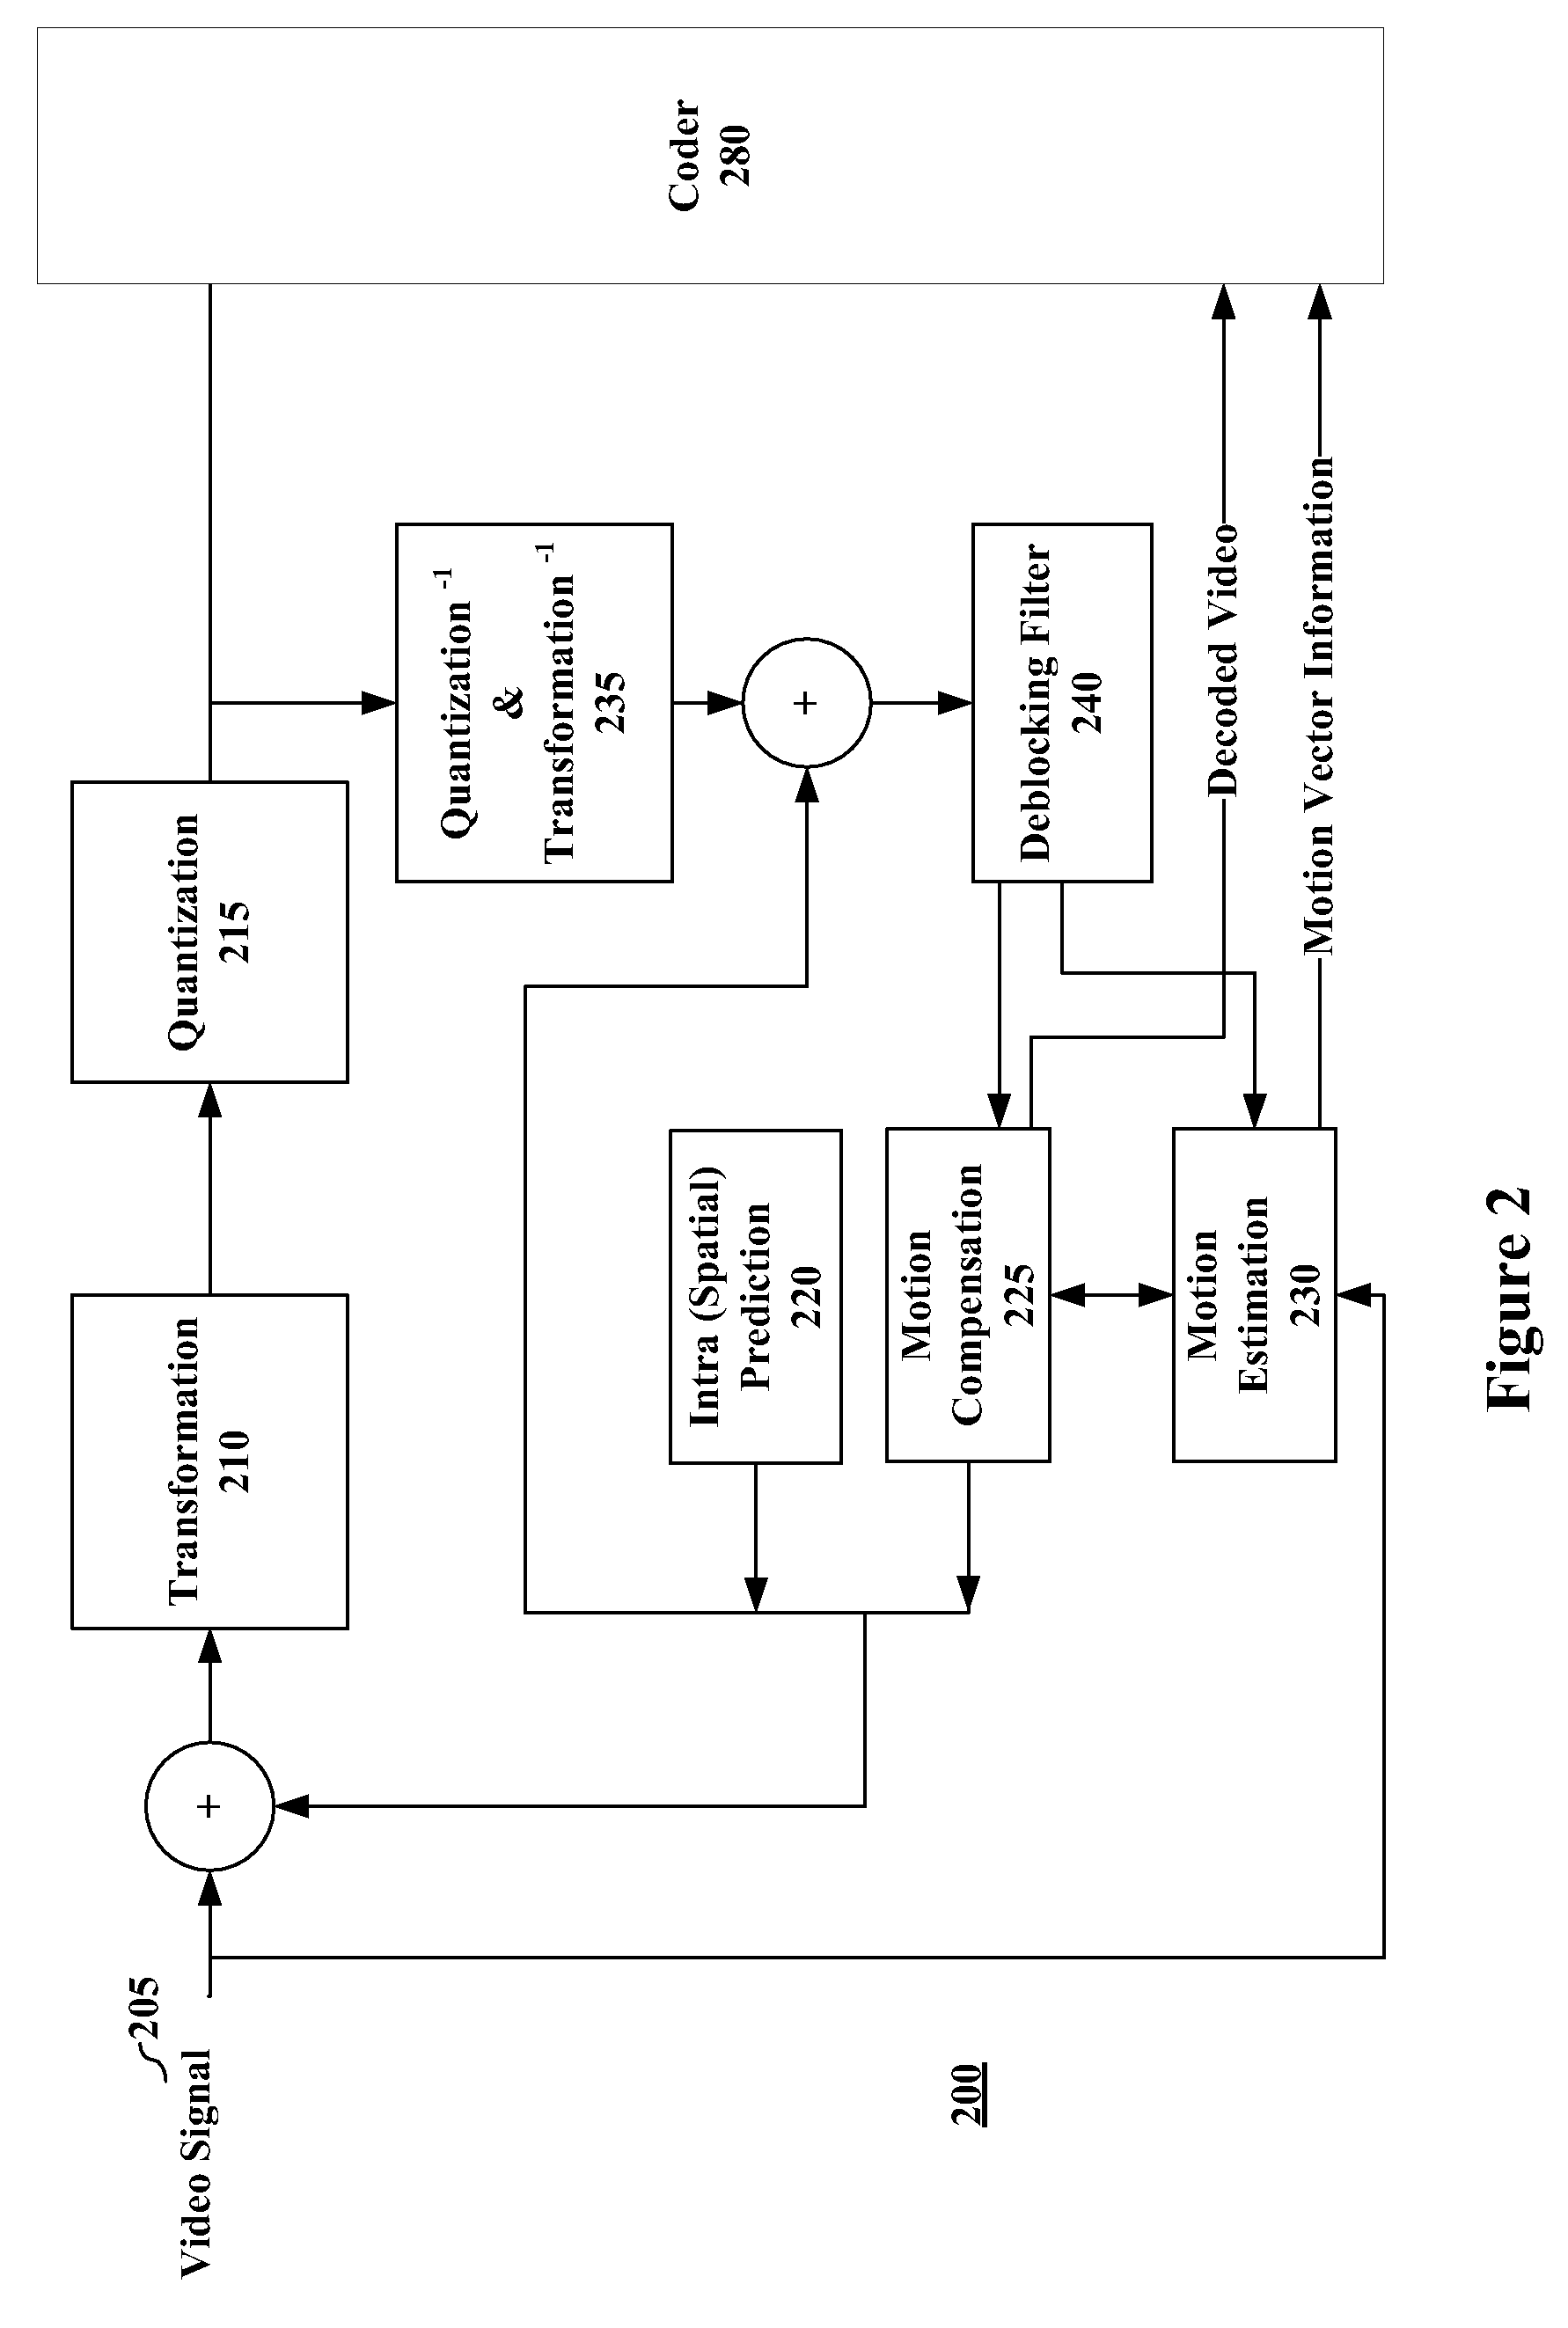 In-loop noise reduction within an encoder framework